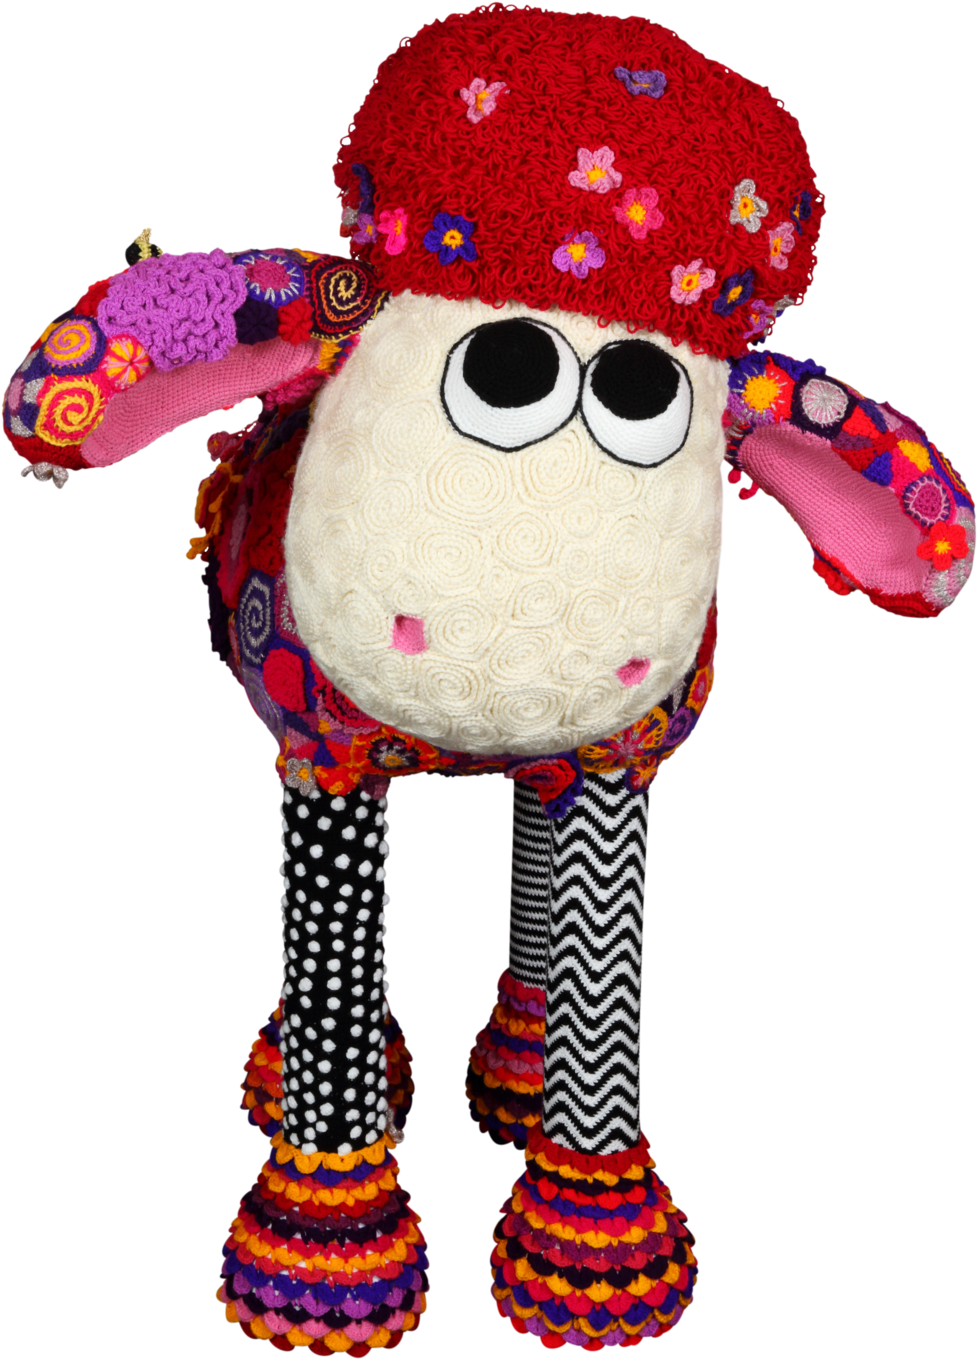 Colorful Knitted Shaunthe Sheep Figure PNG